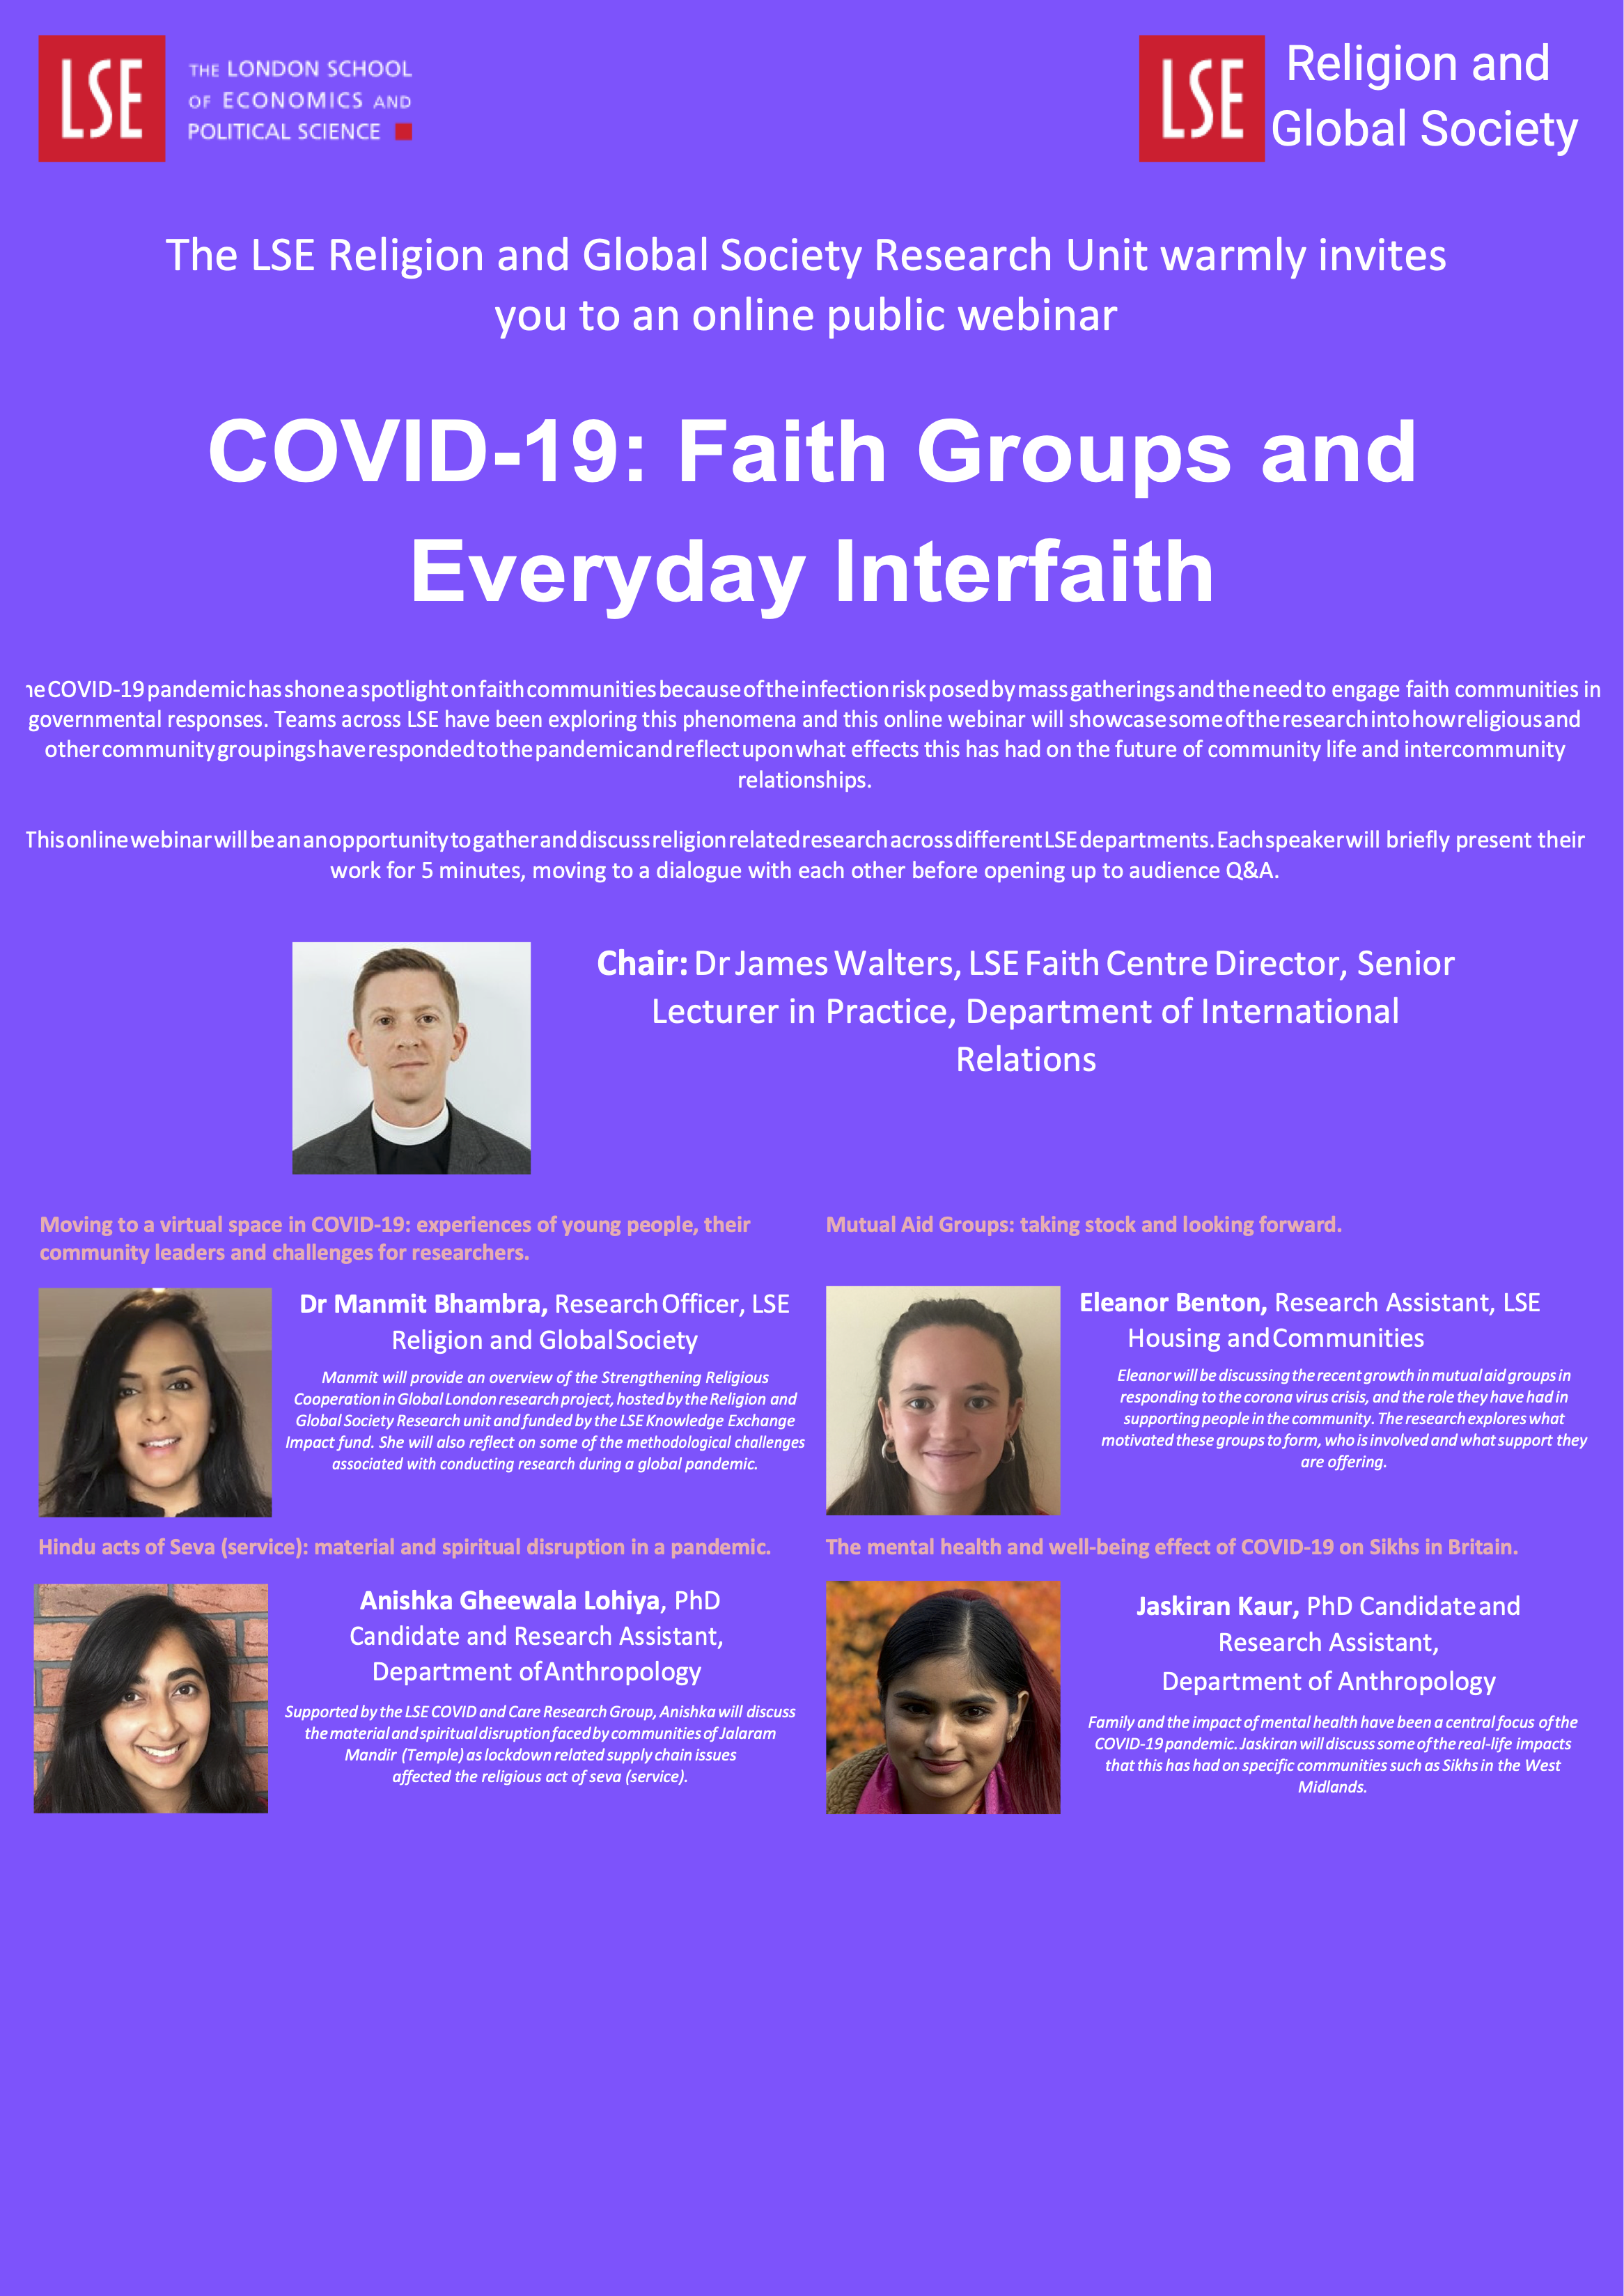 COVID19 and EVERYDAY INTERFAITH POSTER-converted